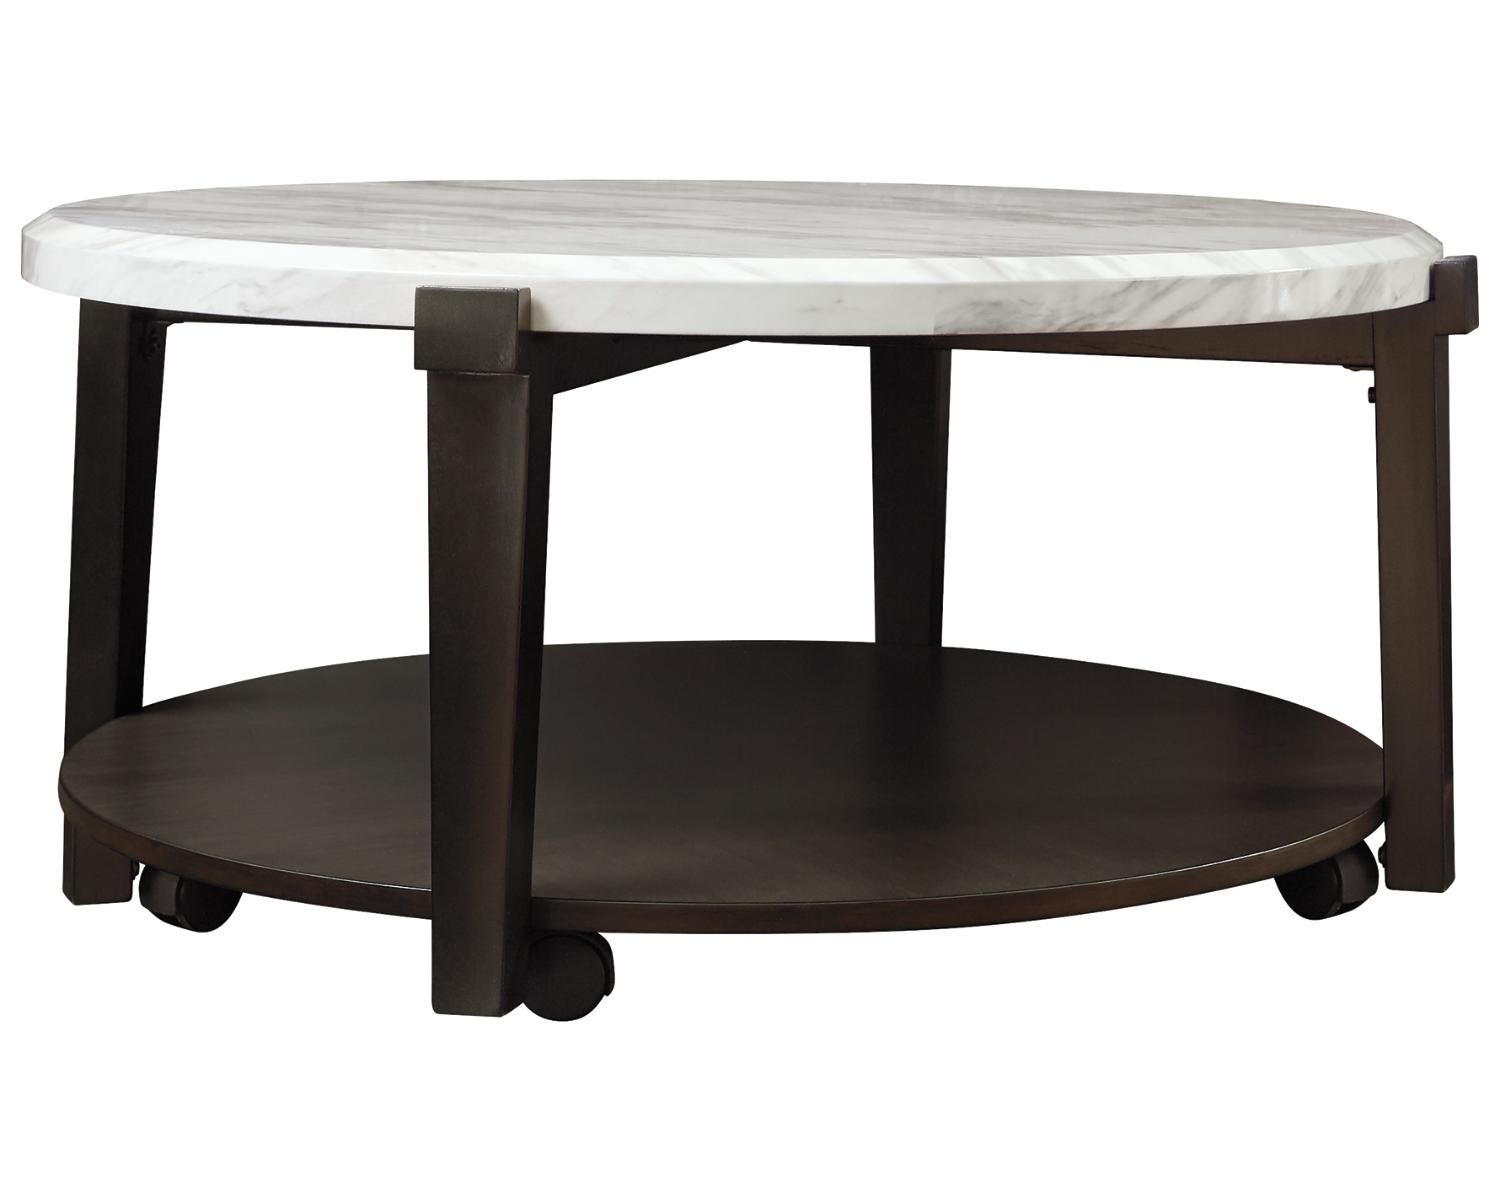 Signature Designashley Janilly Dark Brown Round Regarding Faux White Marble And Metal Coffee Tables (View 10 of 15)